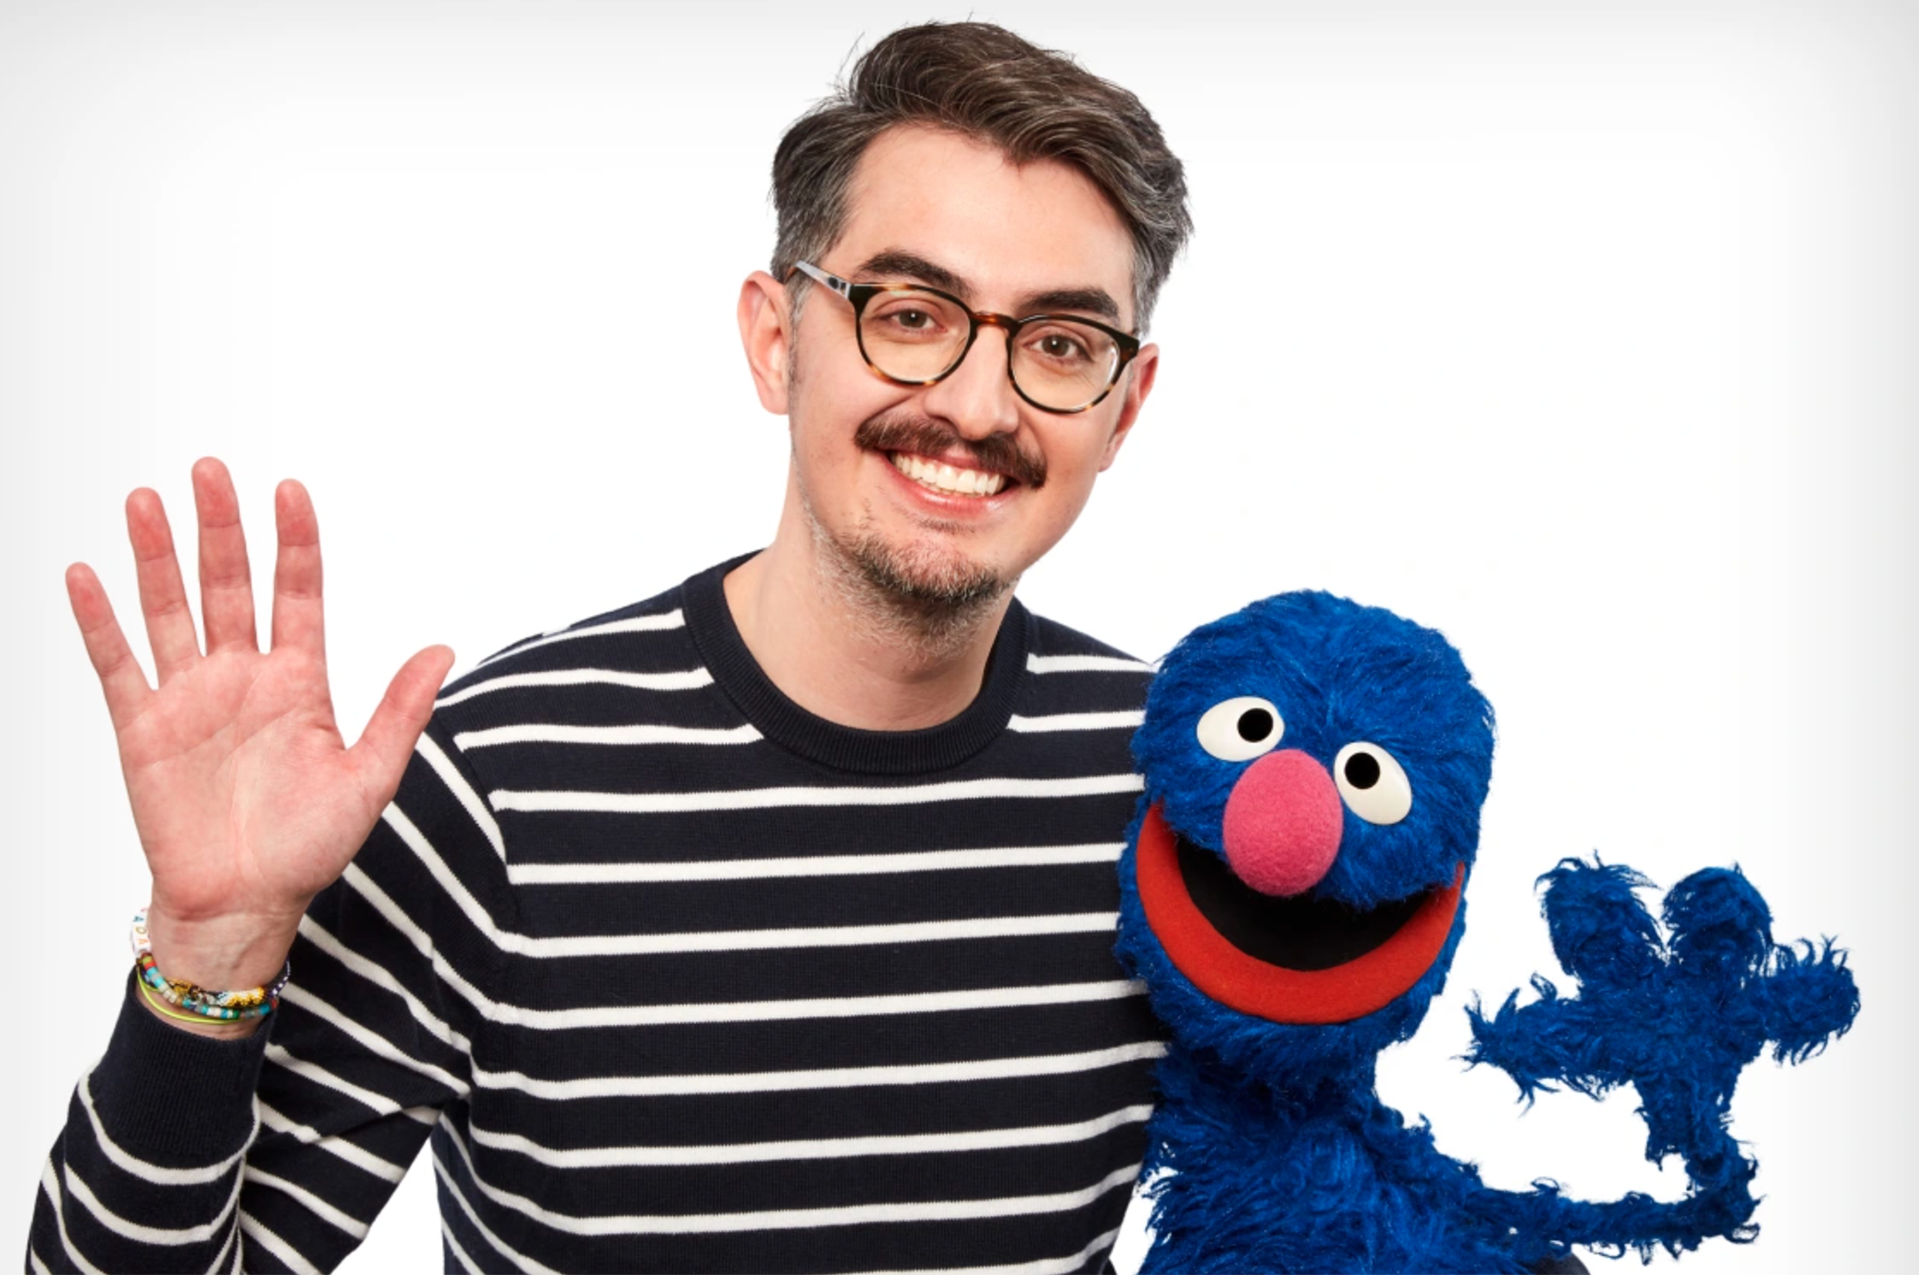 NYU Tisch alum Sal Perez waves his hand while standing next to Grover, a blue puppet character who appears on “Sesame Street,” a long-standing television show for children.